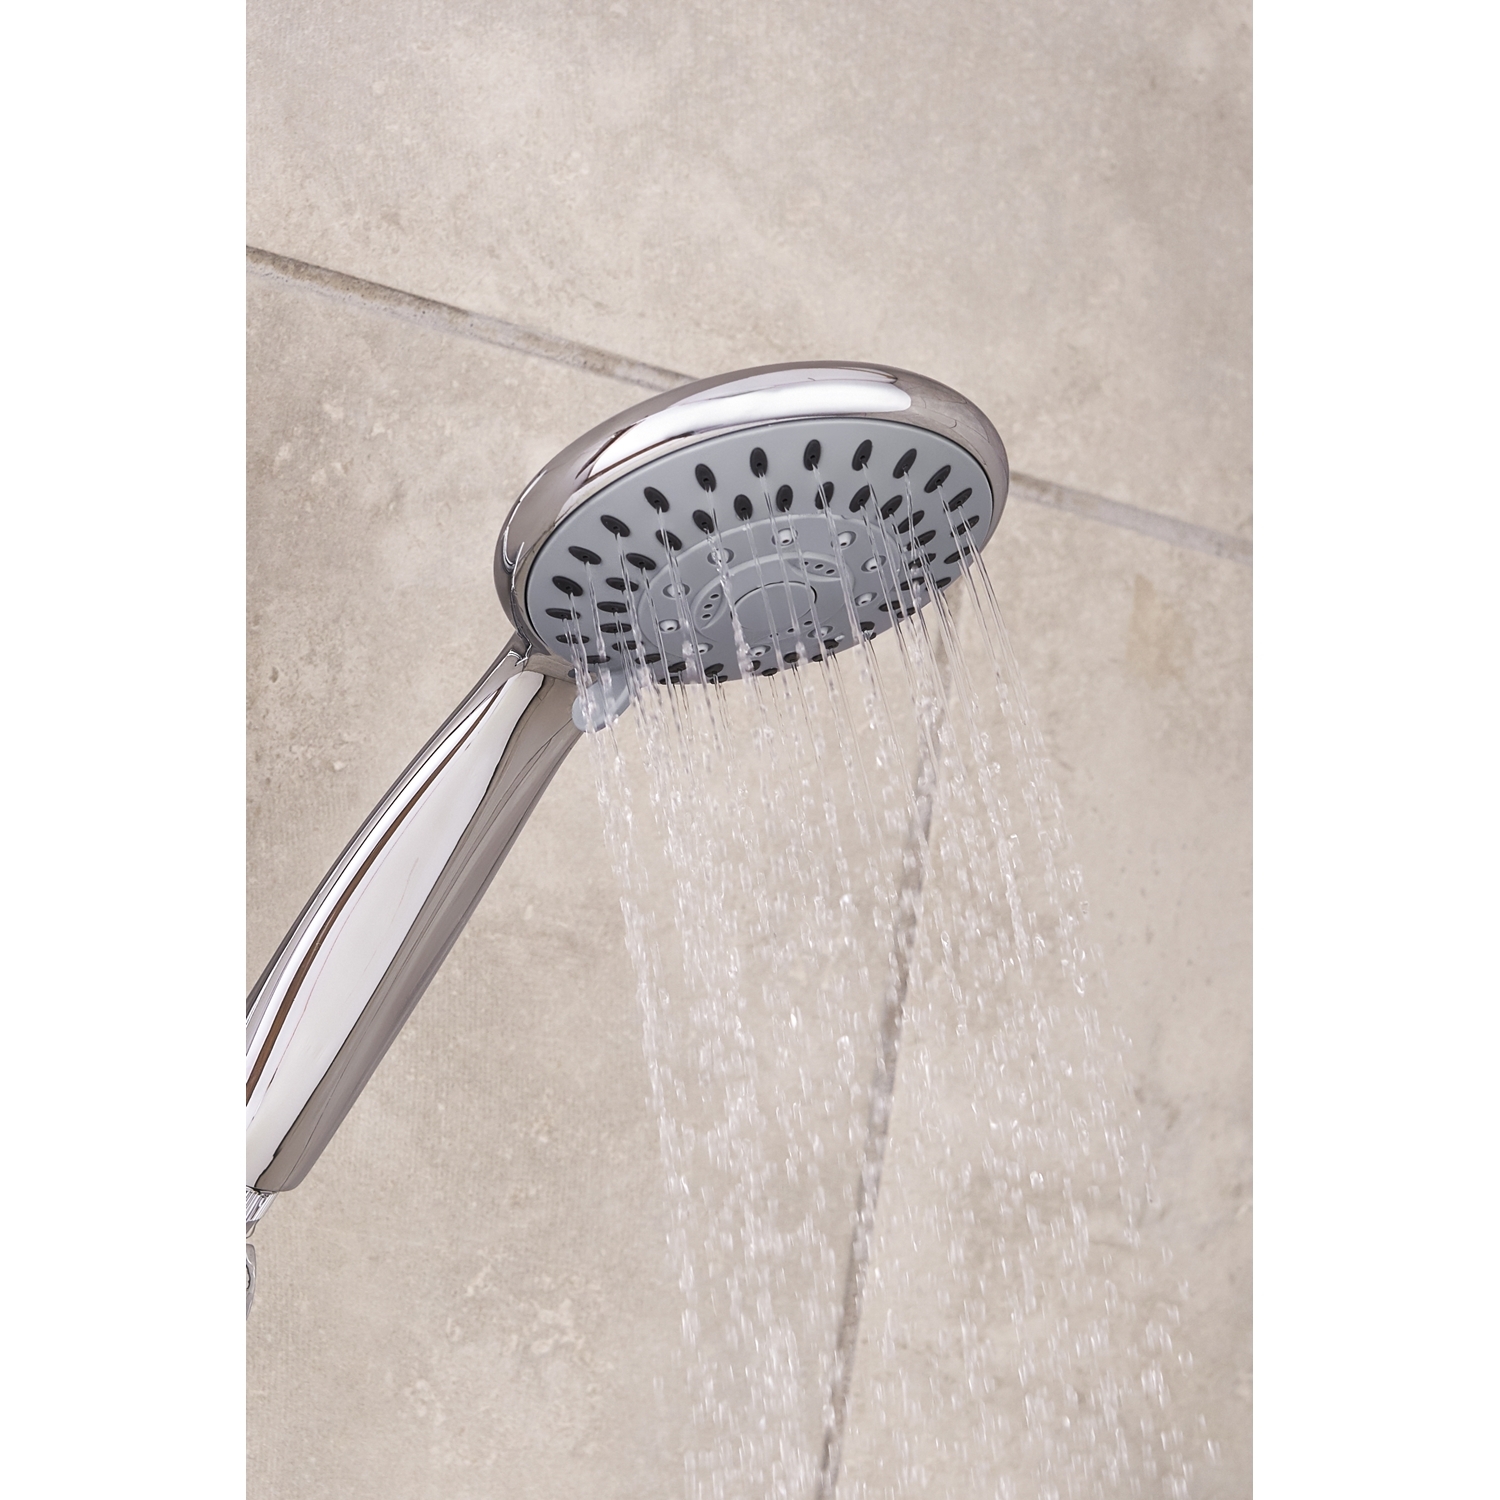 Five Function Eco Shower Head Chrome - Silver Image 2